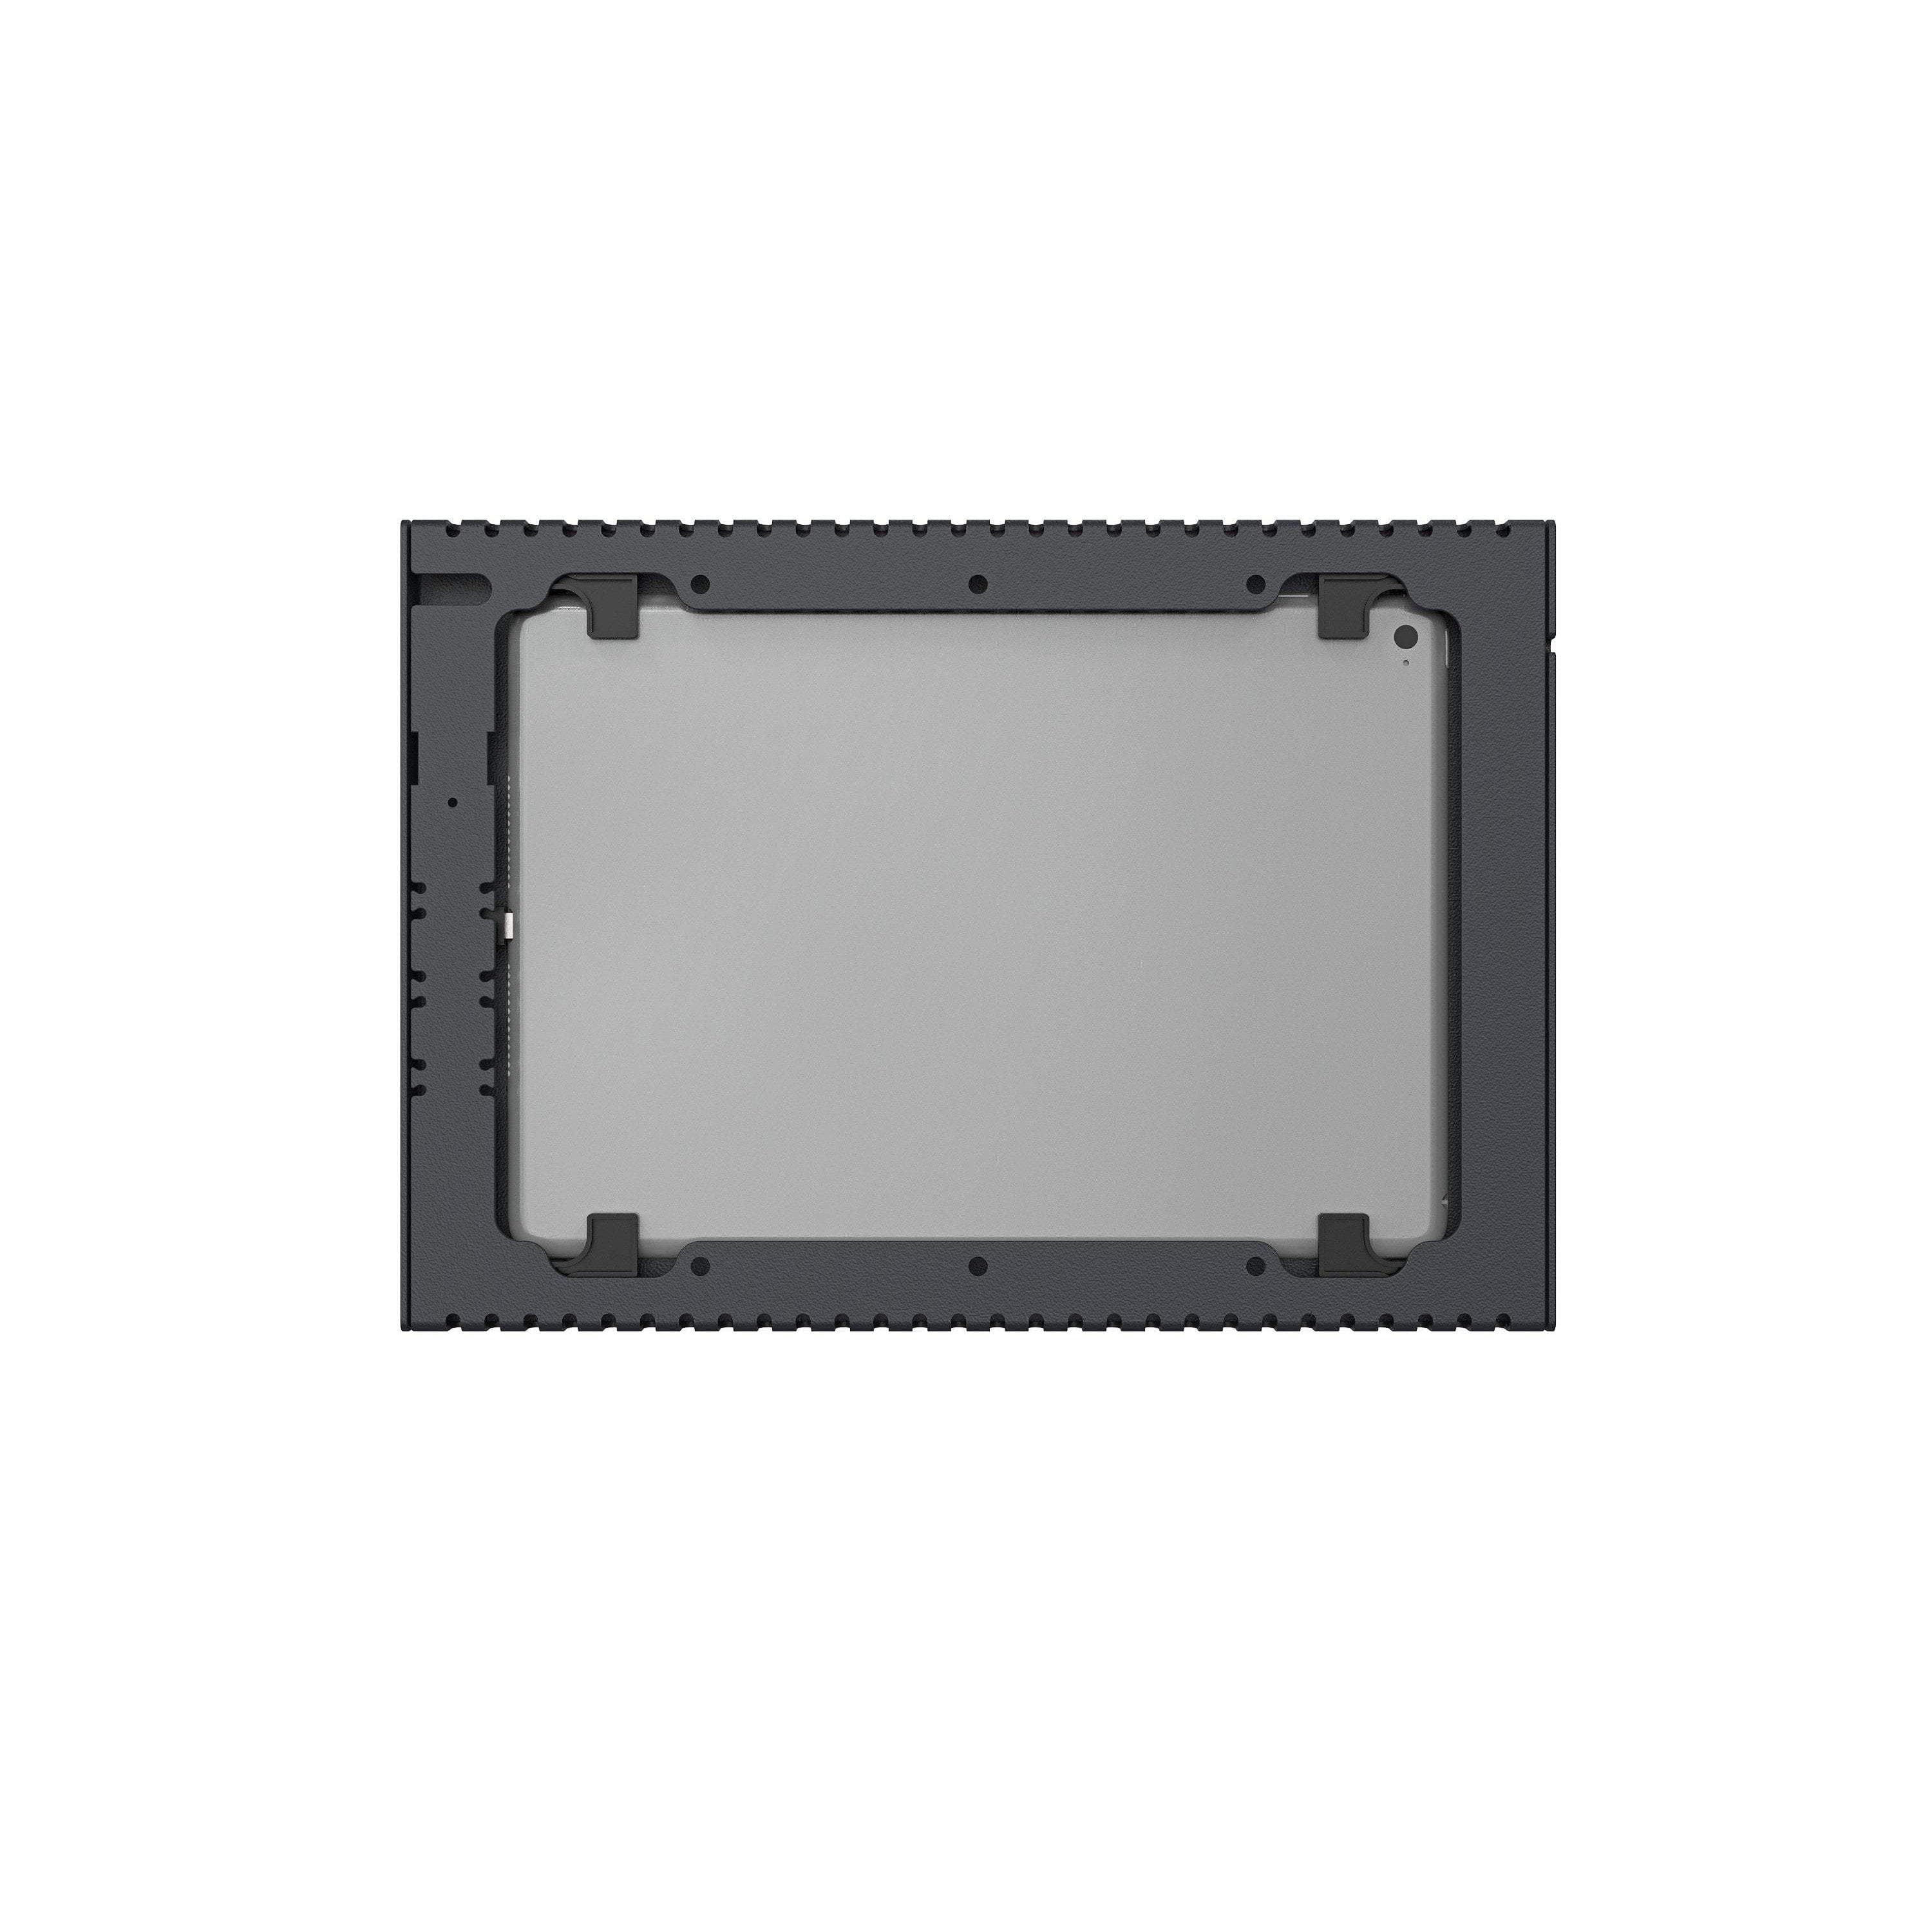 PoE Texas For Tablets Heckler Wall Mount Enclosure with Power for iPad for Digital Signage, Zoom Conference Room Schedulers, and More - 24v Passive - Fits 10.2" iPad 7th Generation